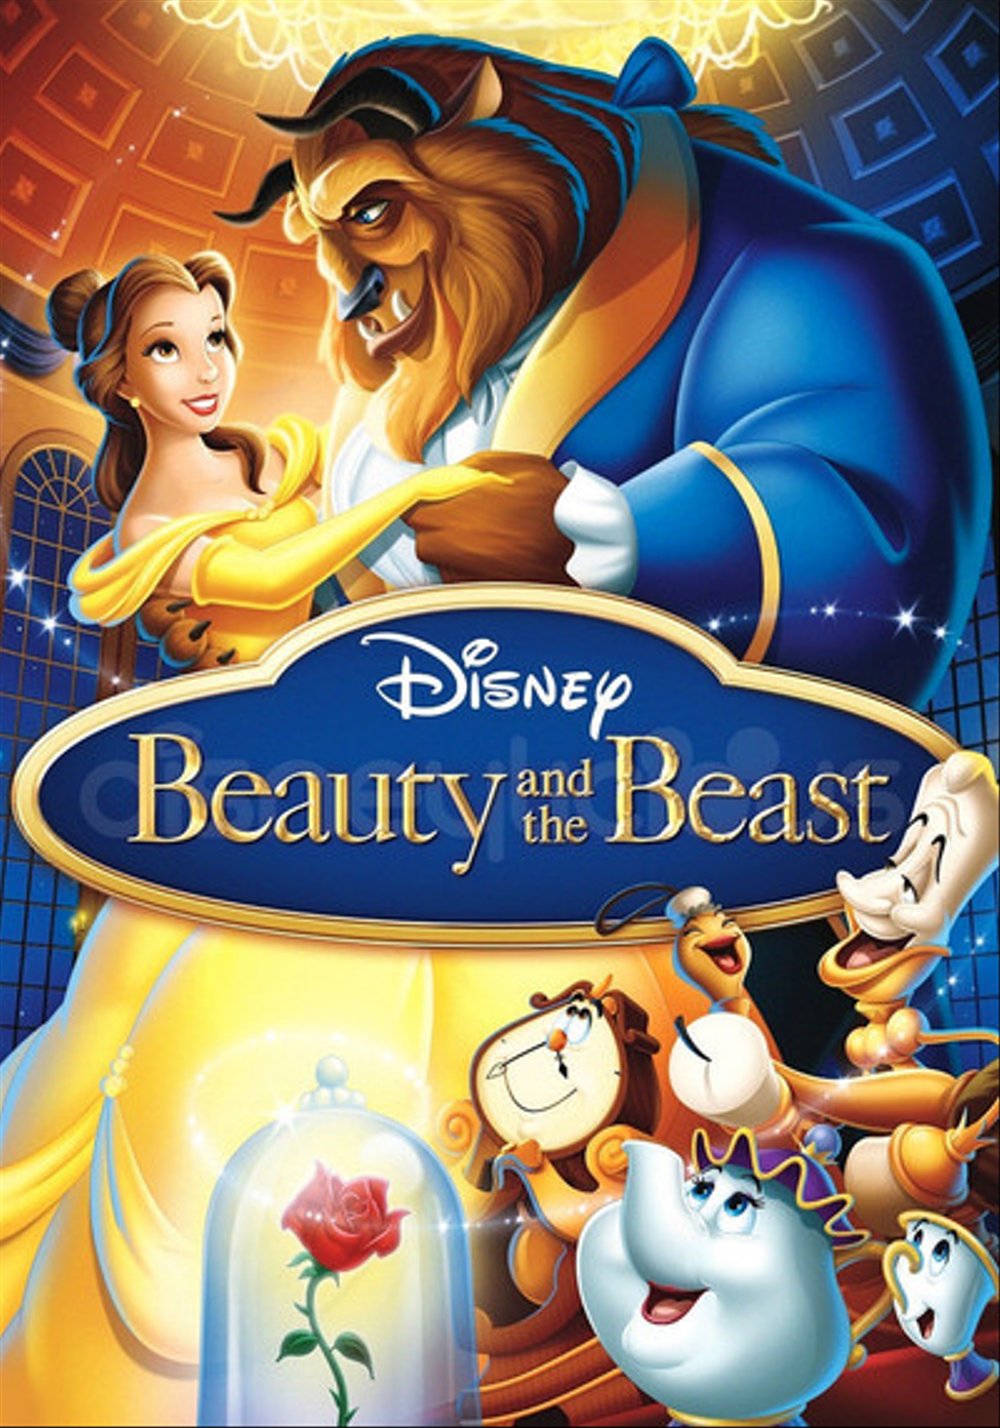 Mr. Movie: Disney's Beauty and the Beast (1991) (Movie Review)